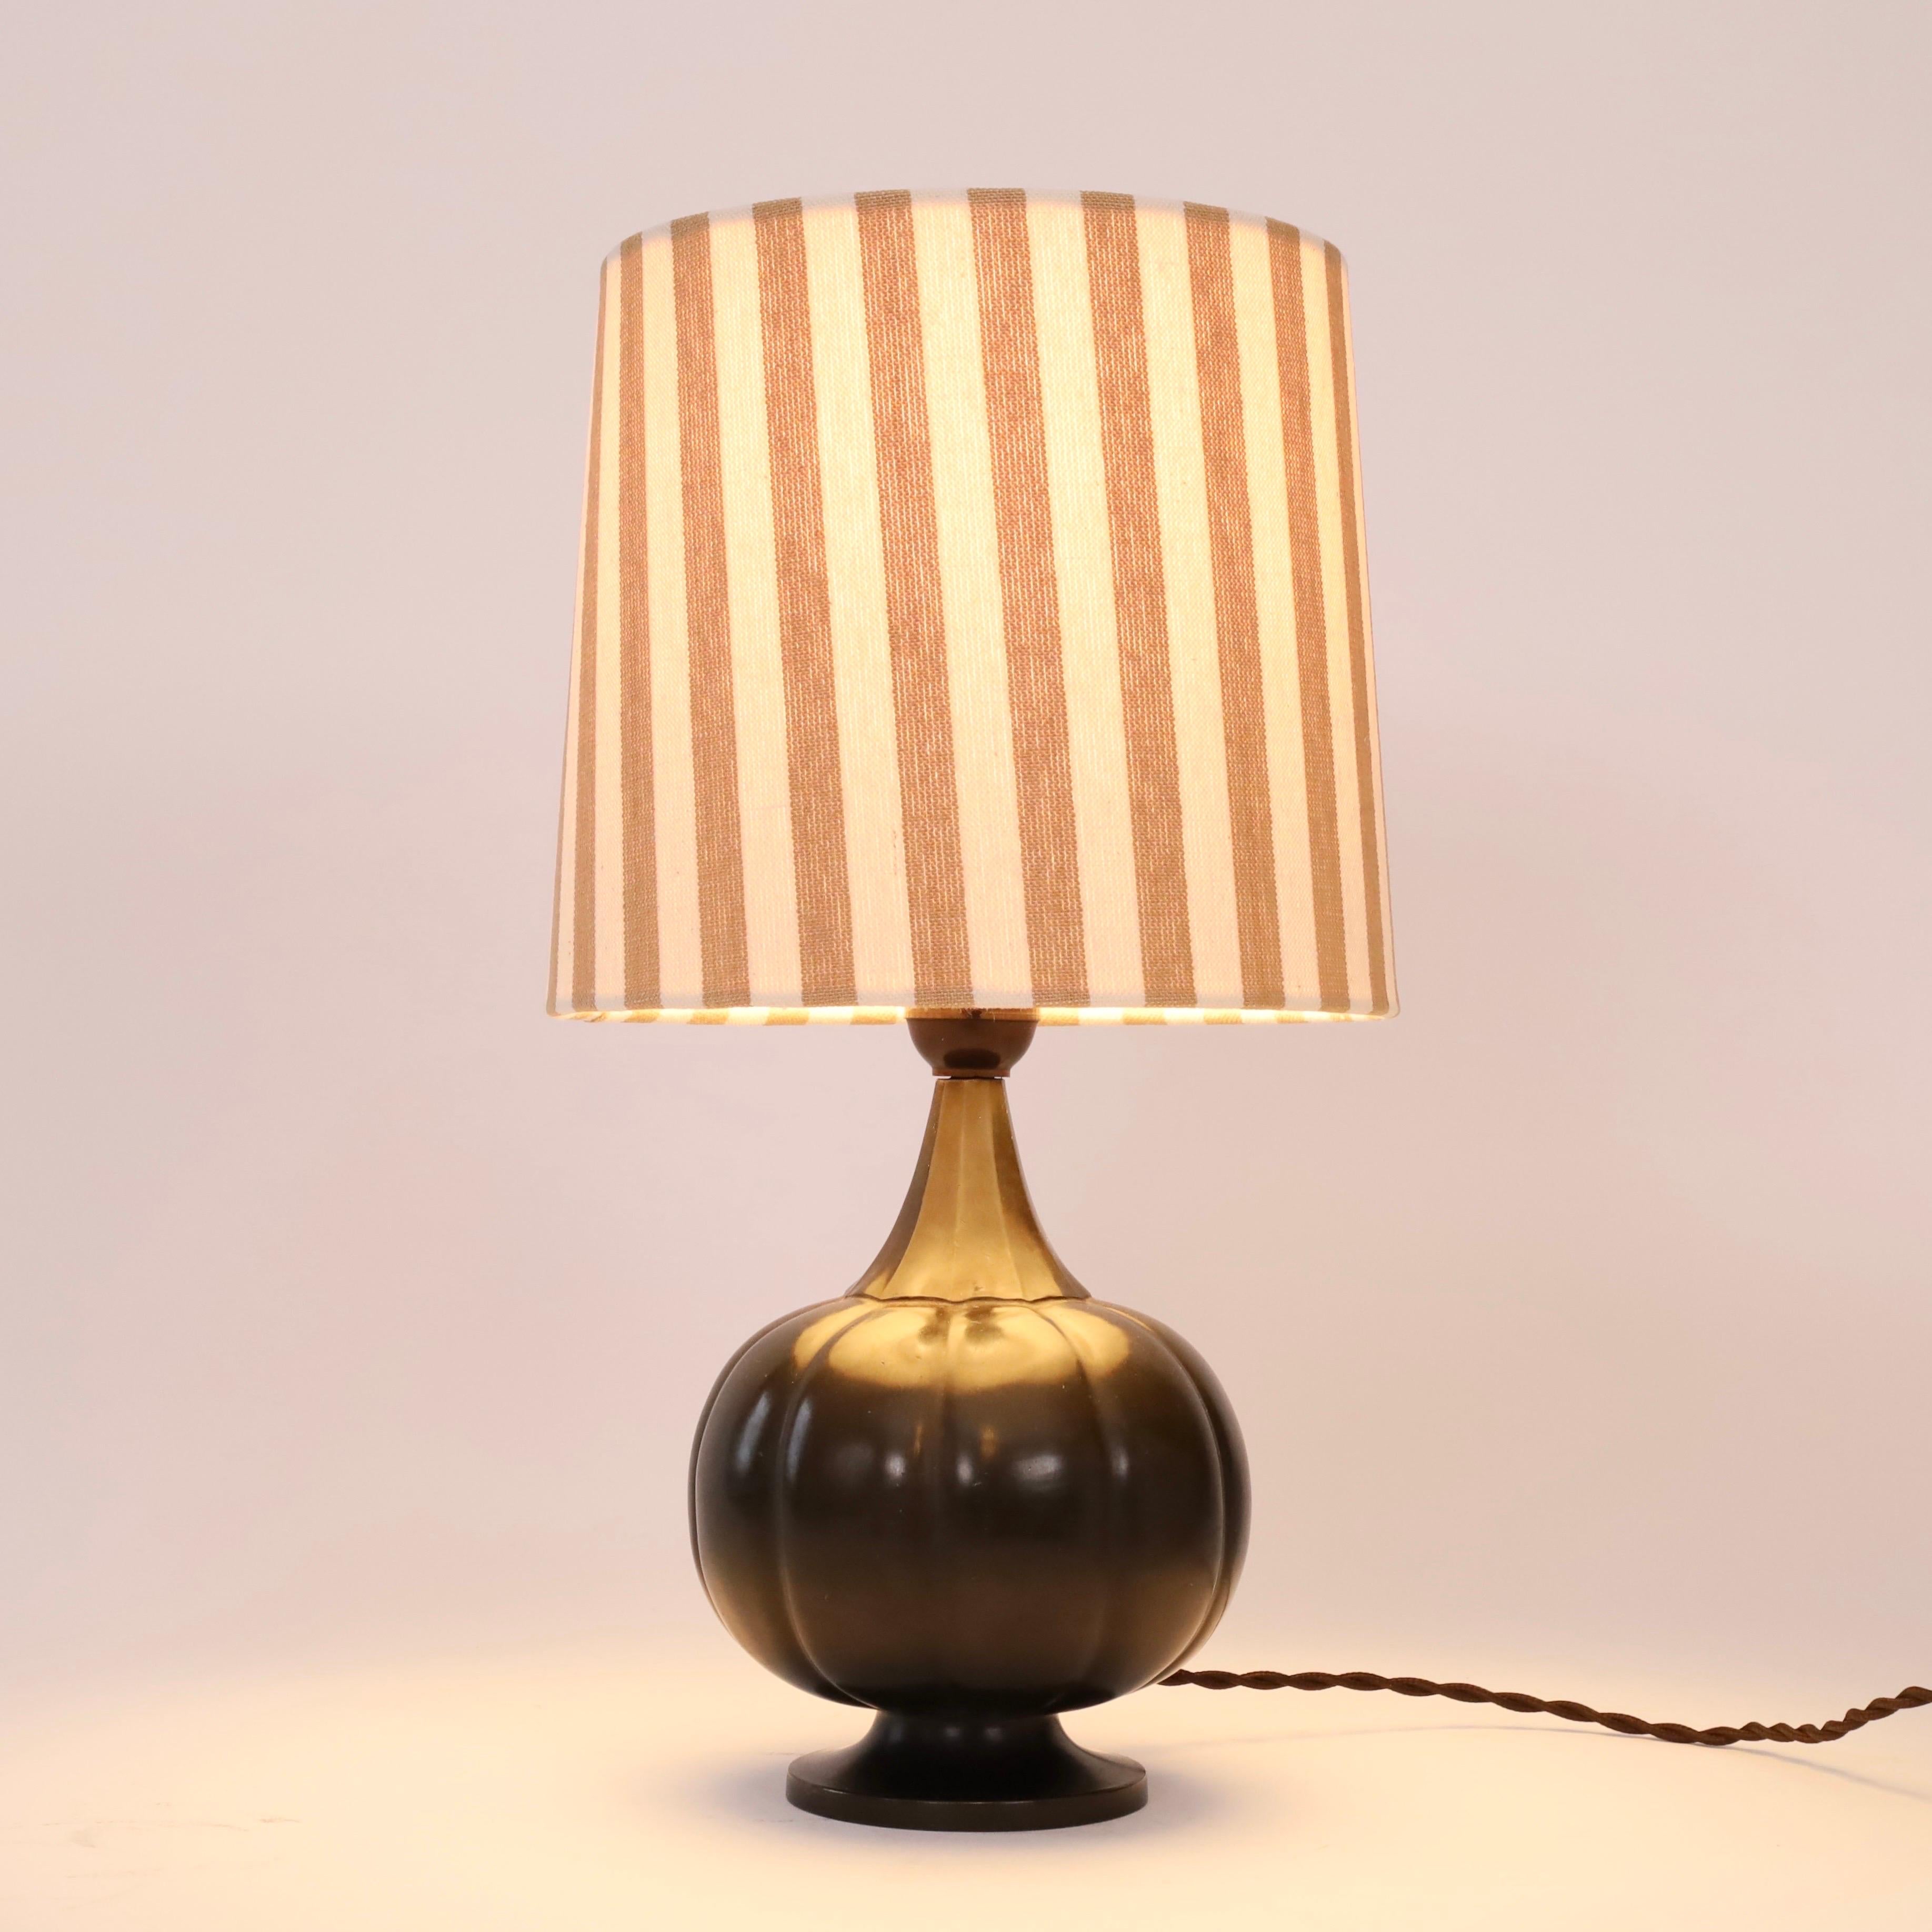 Set of round Just Andersen Table Lamps, 1920s, Denmark 1